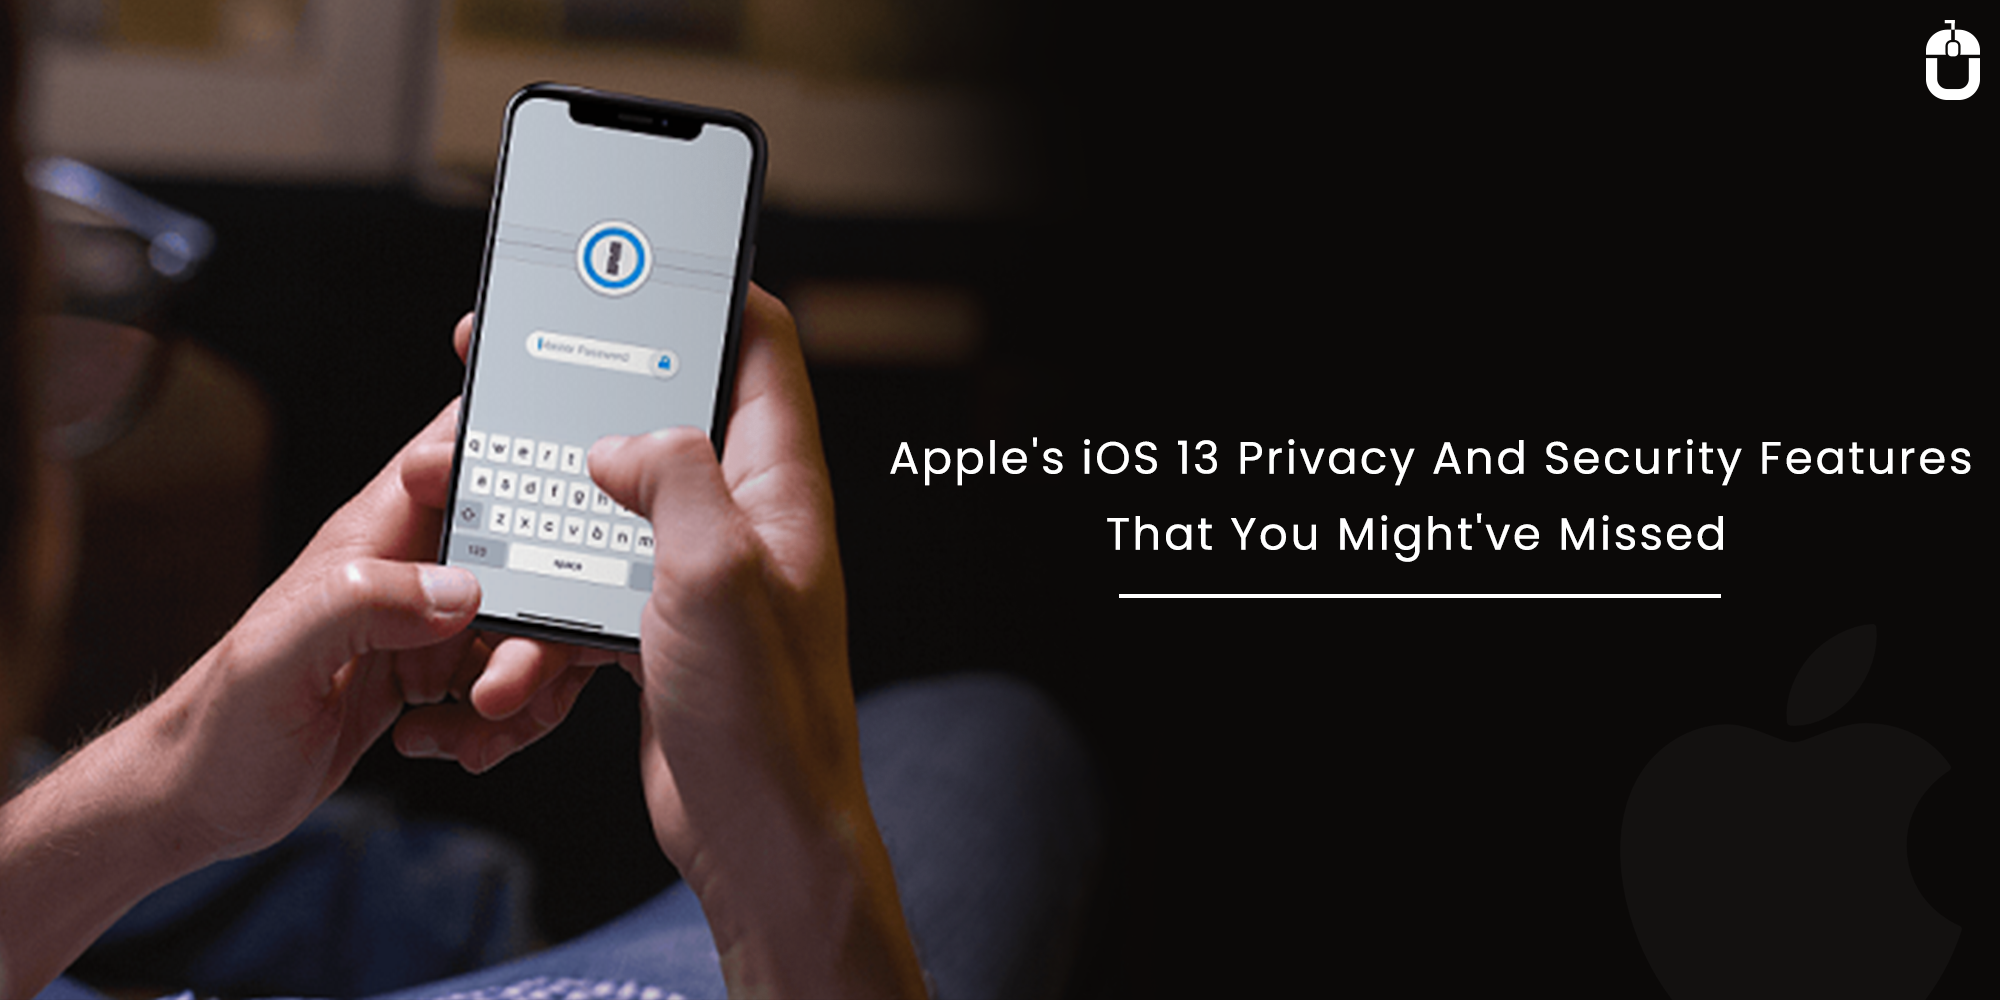 Apple’s iOS 13 Privacy And Security Features That You Might’ve Missed